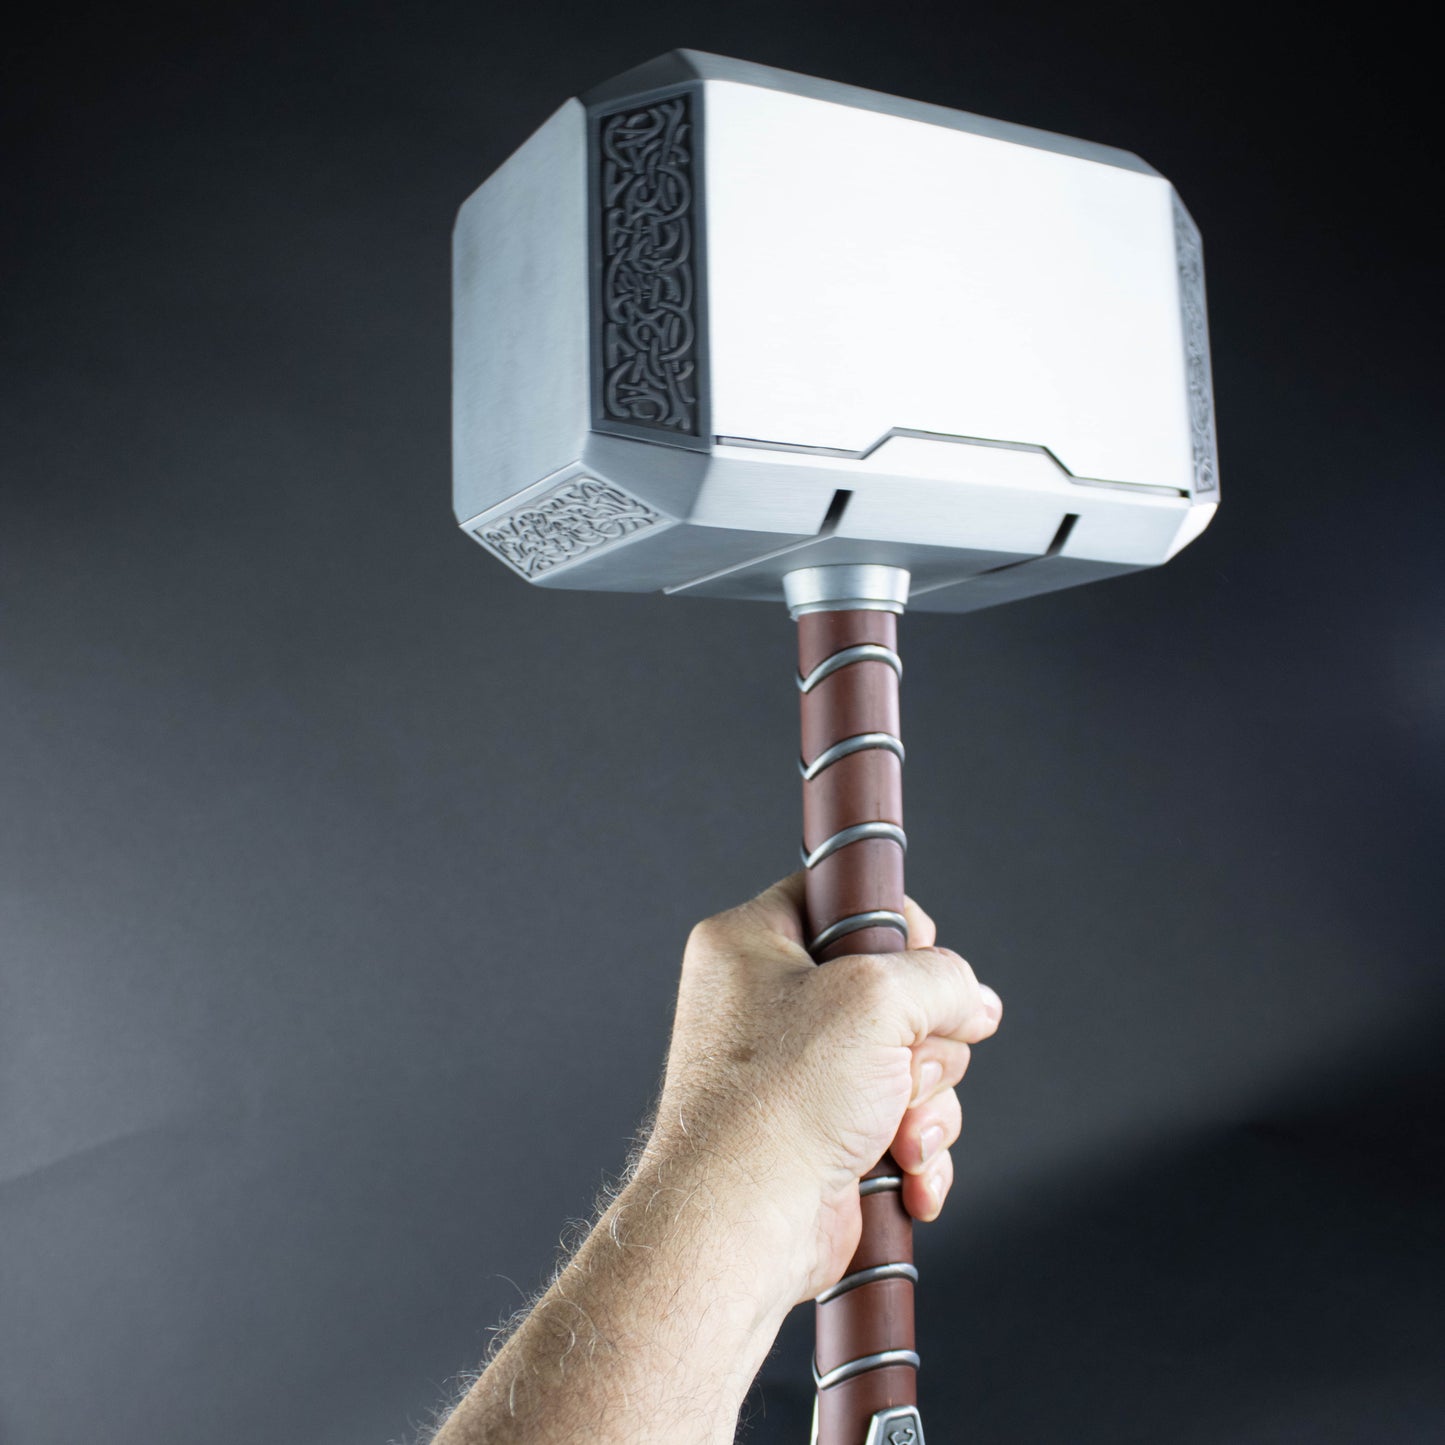 Load image into Gallery viewer, Thor Hammer Mjolnir Steel Prop Replica With Display Base
